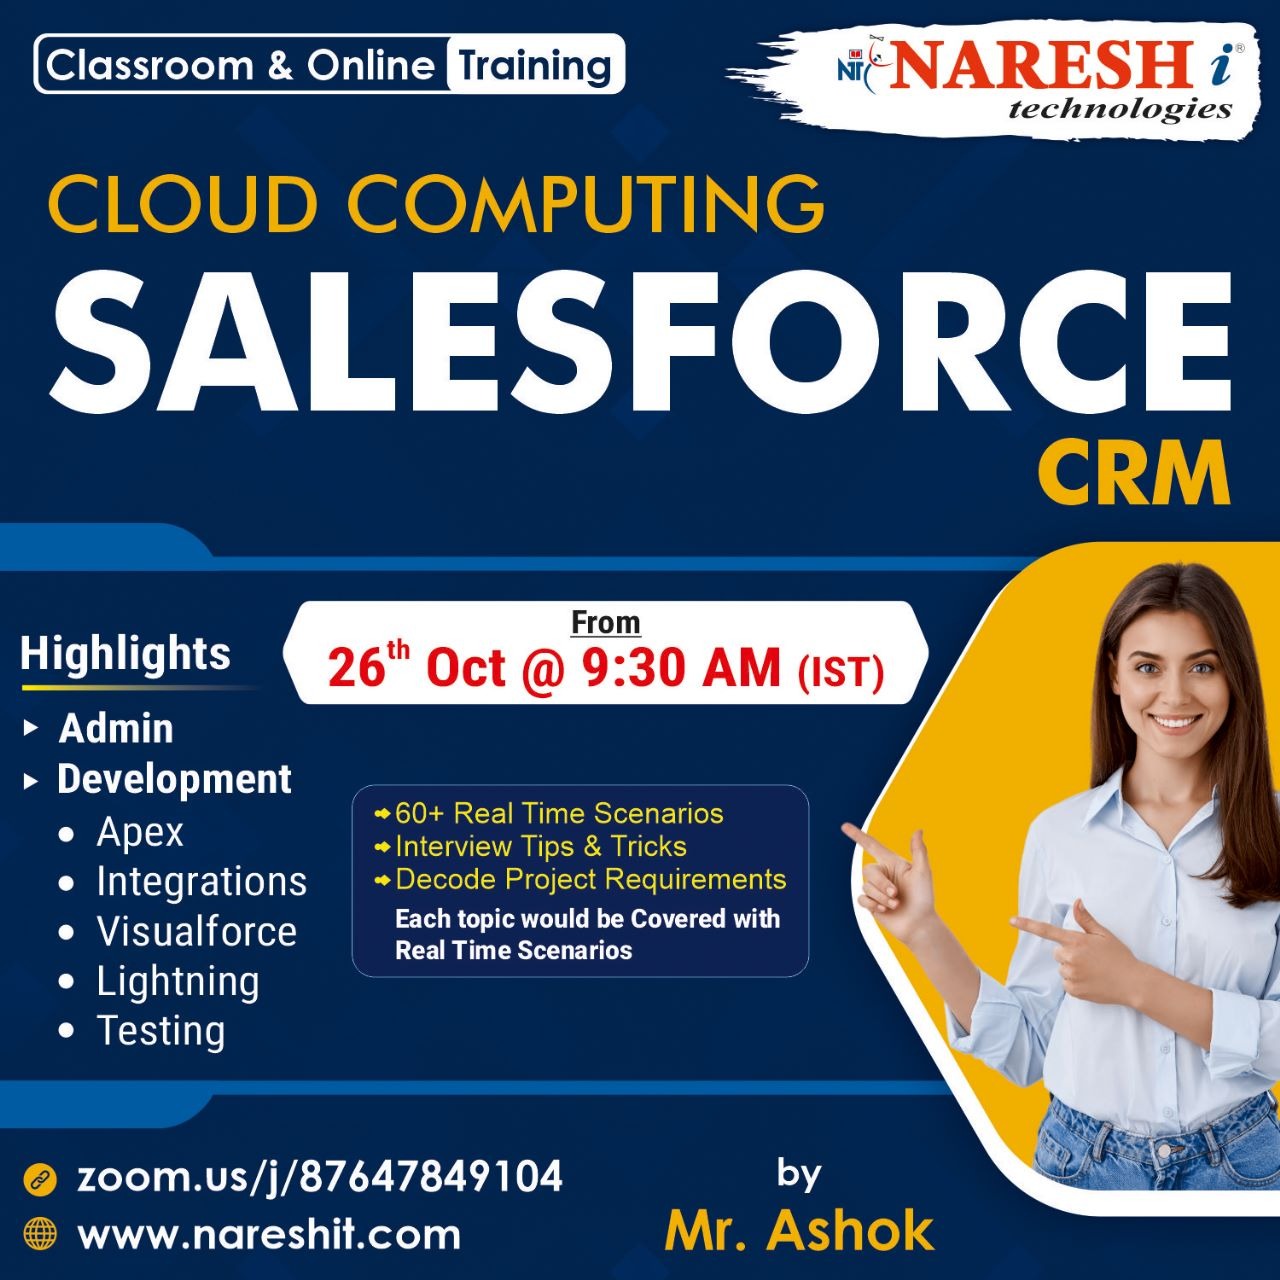 Attend Free Demo On Salesforce CRM by Mr. Ashok-NareshIT, Online Event